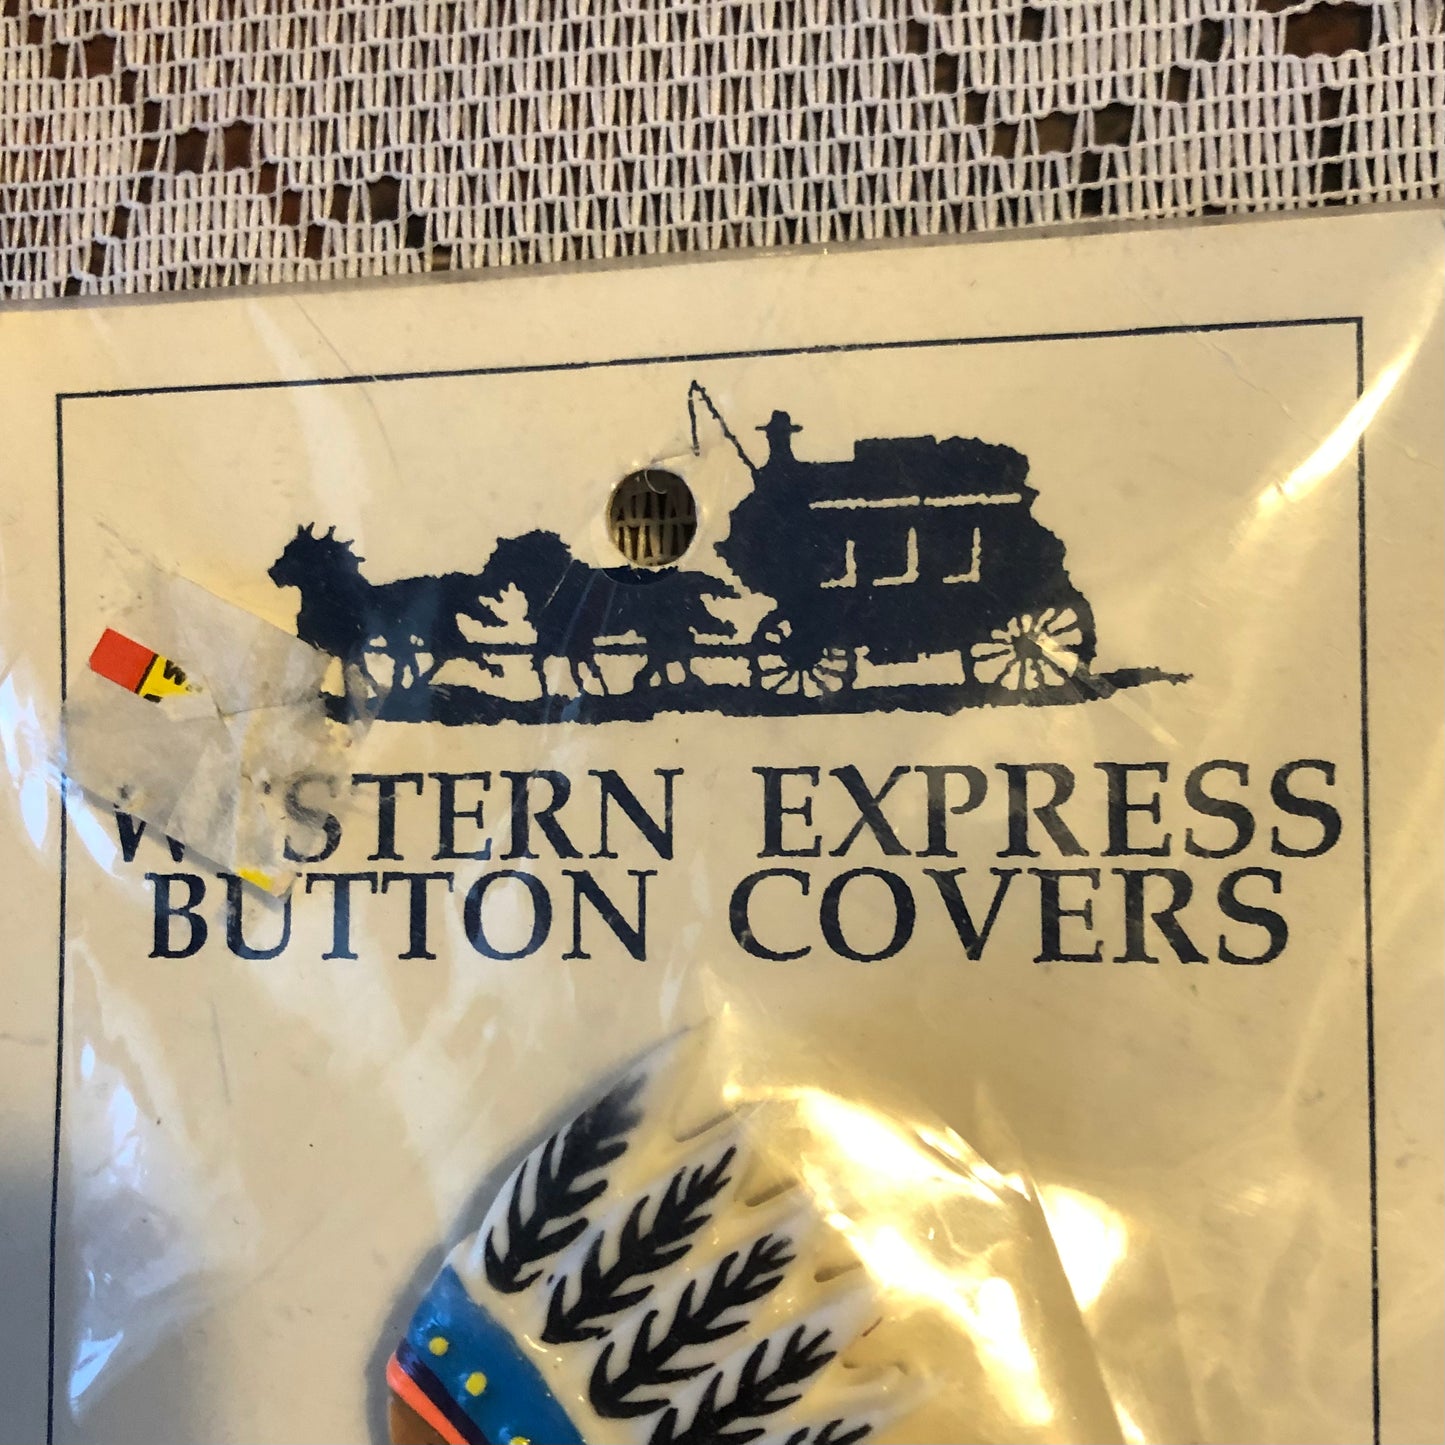 New Old Stock Western Express Button Covers | Made in Taiwan